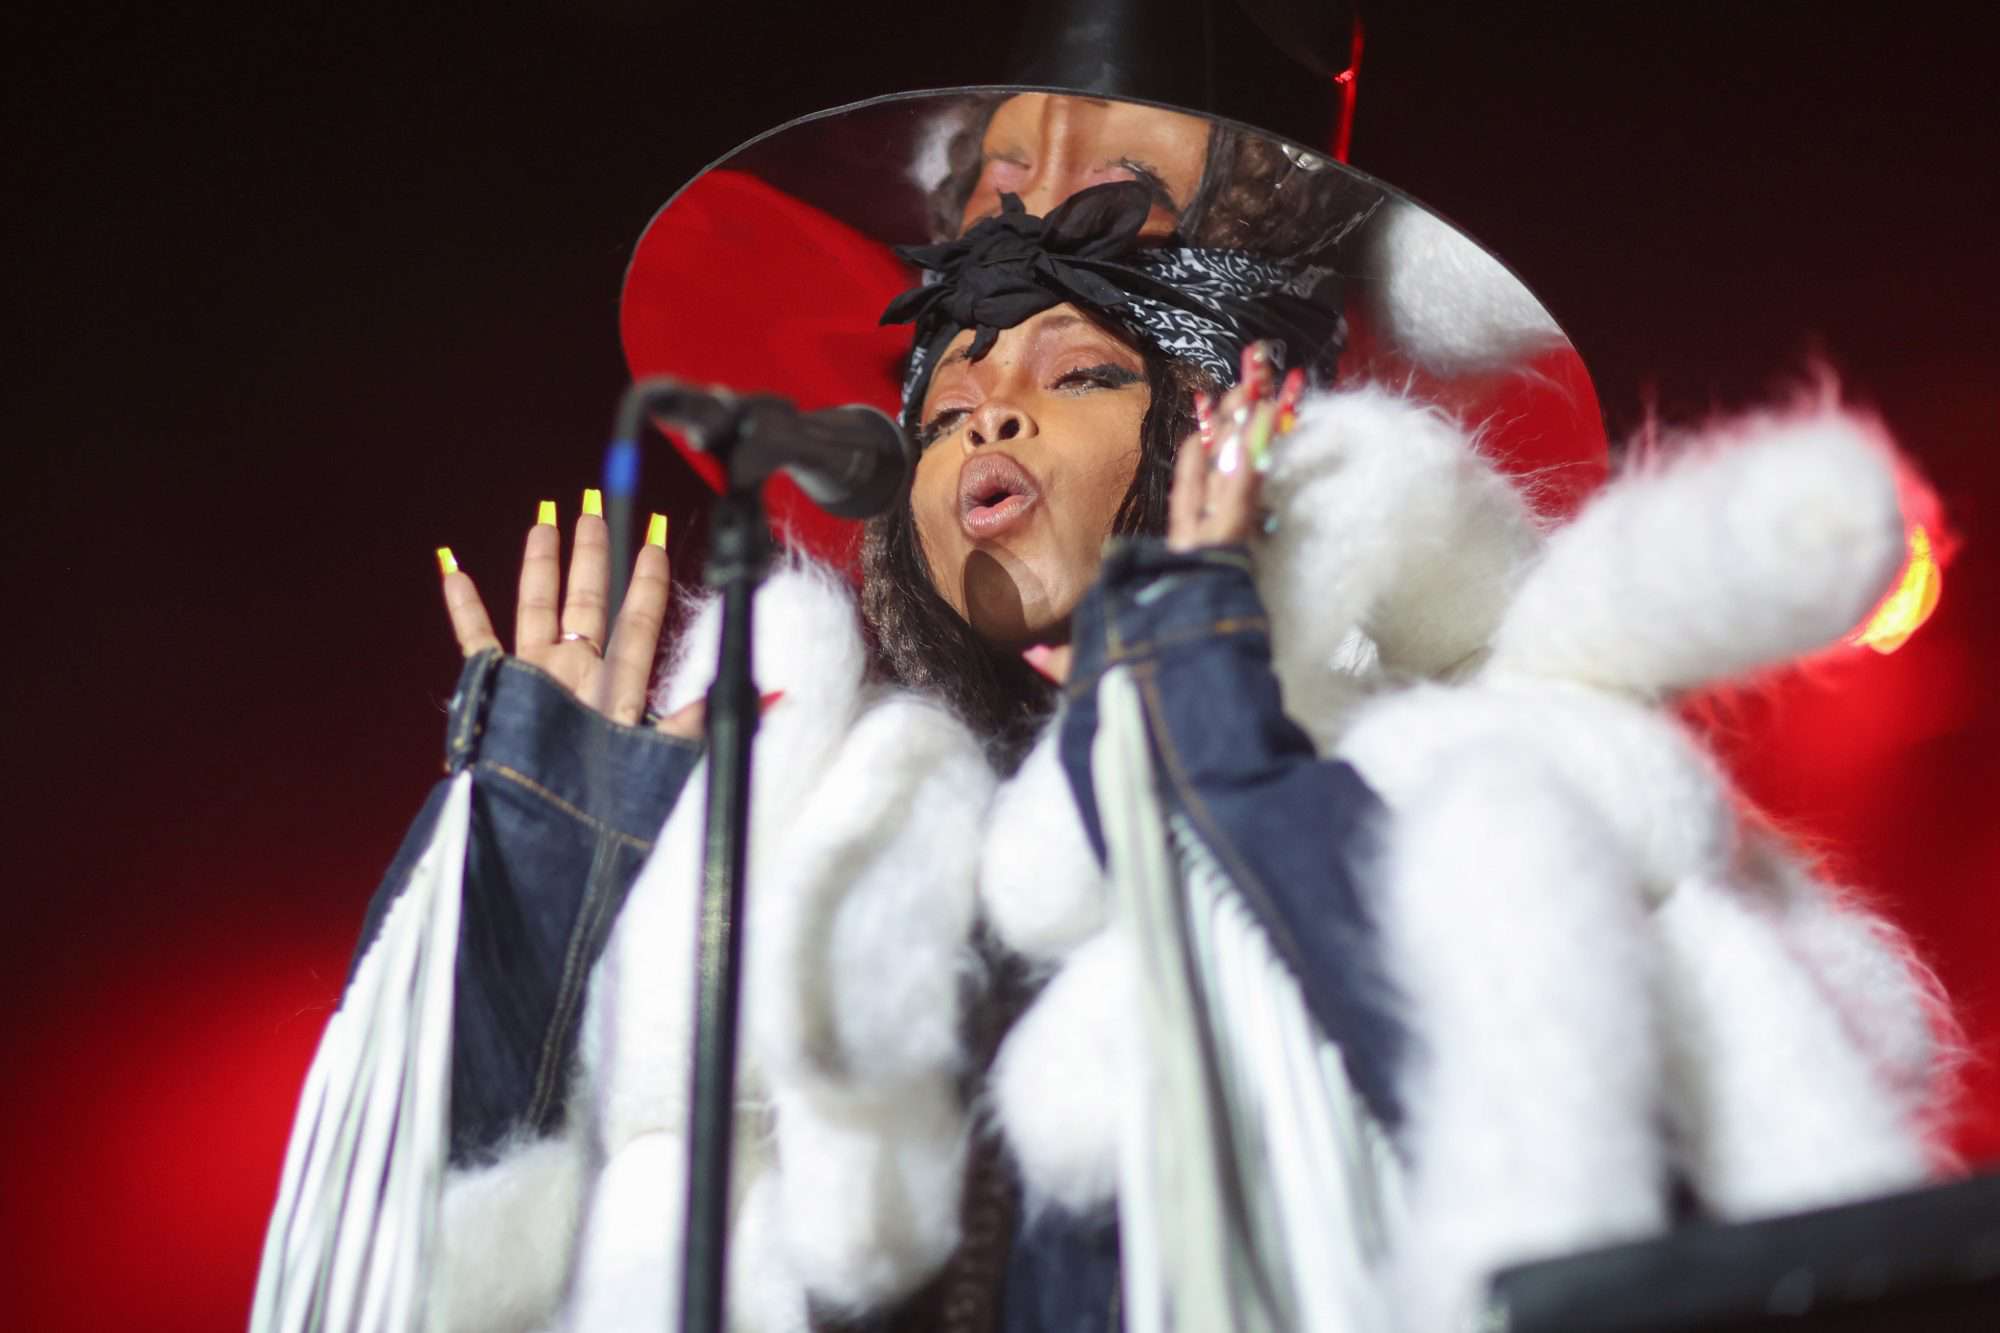 DALLAS, TX - FEBRUARY 24: American singer-songwriter Erykah Badu performs on stage during Another Badu Birthday Bash concert at The Factory in Deep Ellum on February 24, 2023 in Dallas, Texas. (Photo by Omar Vega/Getty Images)